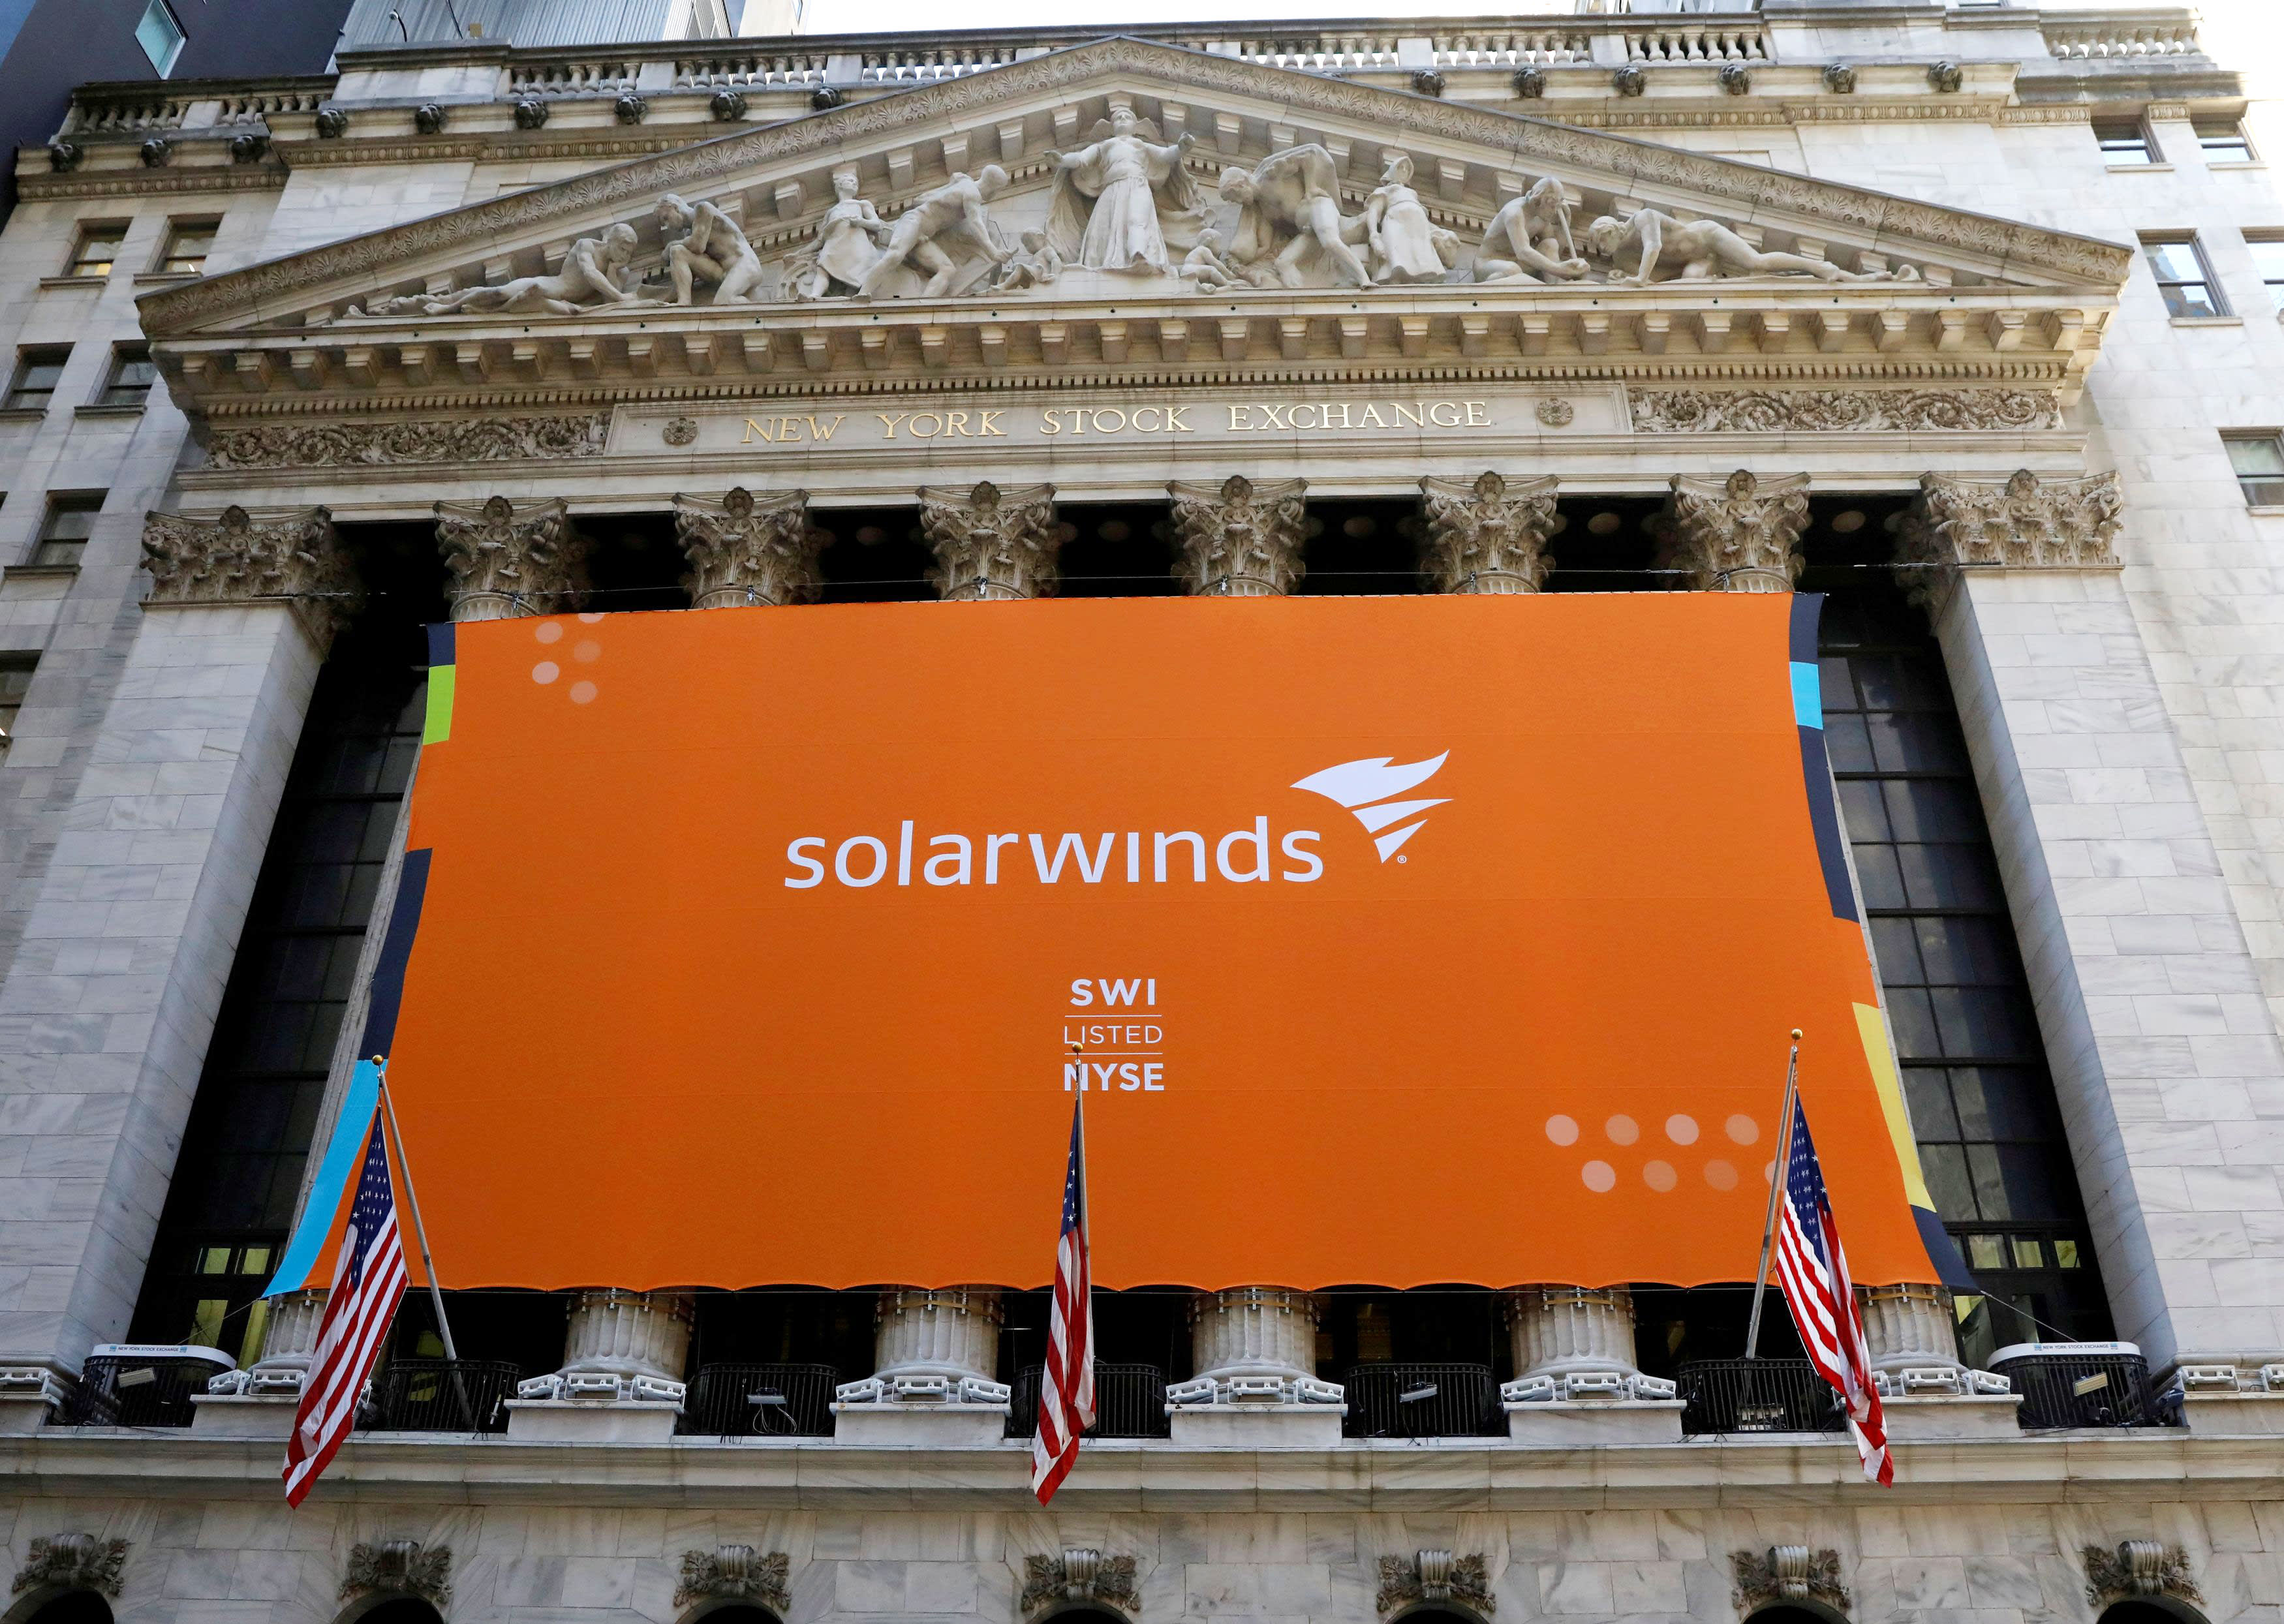 SolarWinds hackers have gained access to DOJ emails, no indication that they have reached classified systems